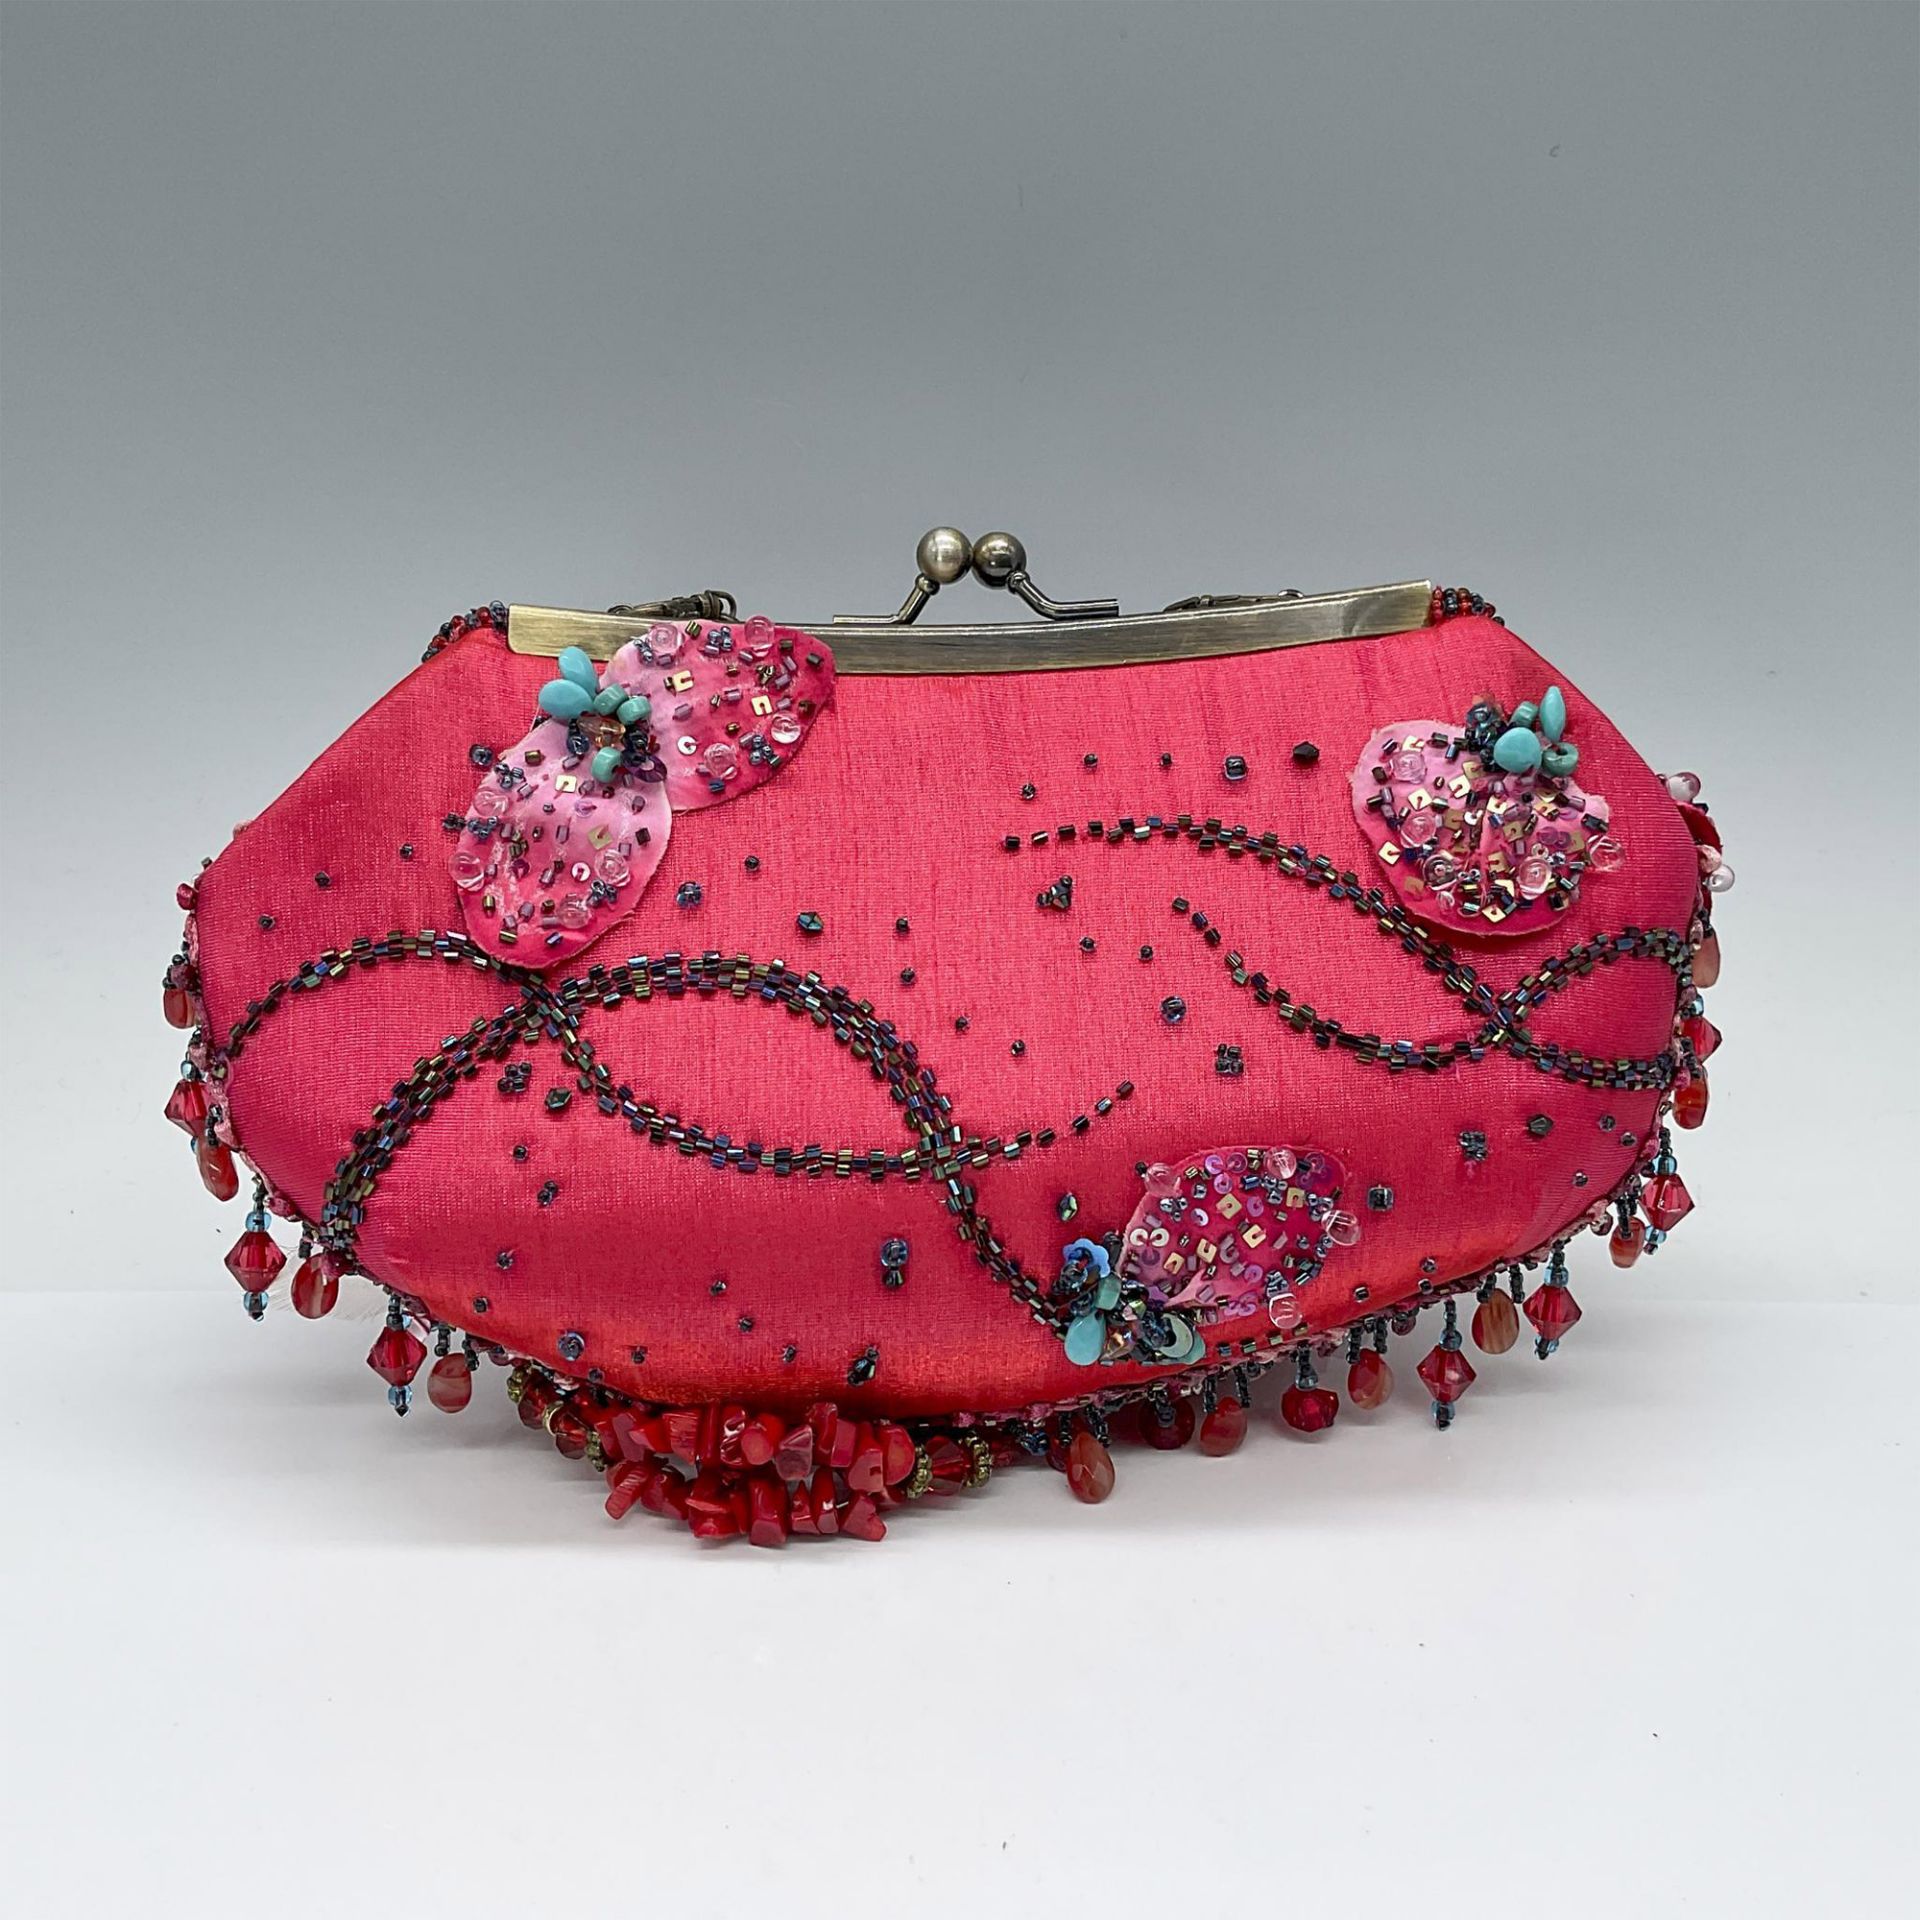 Mary Frances Purse, Flambe Pink Clutch/Short Shoulder - Image 2 of 3